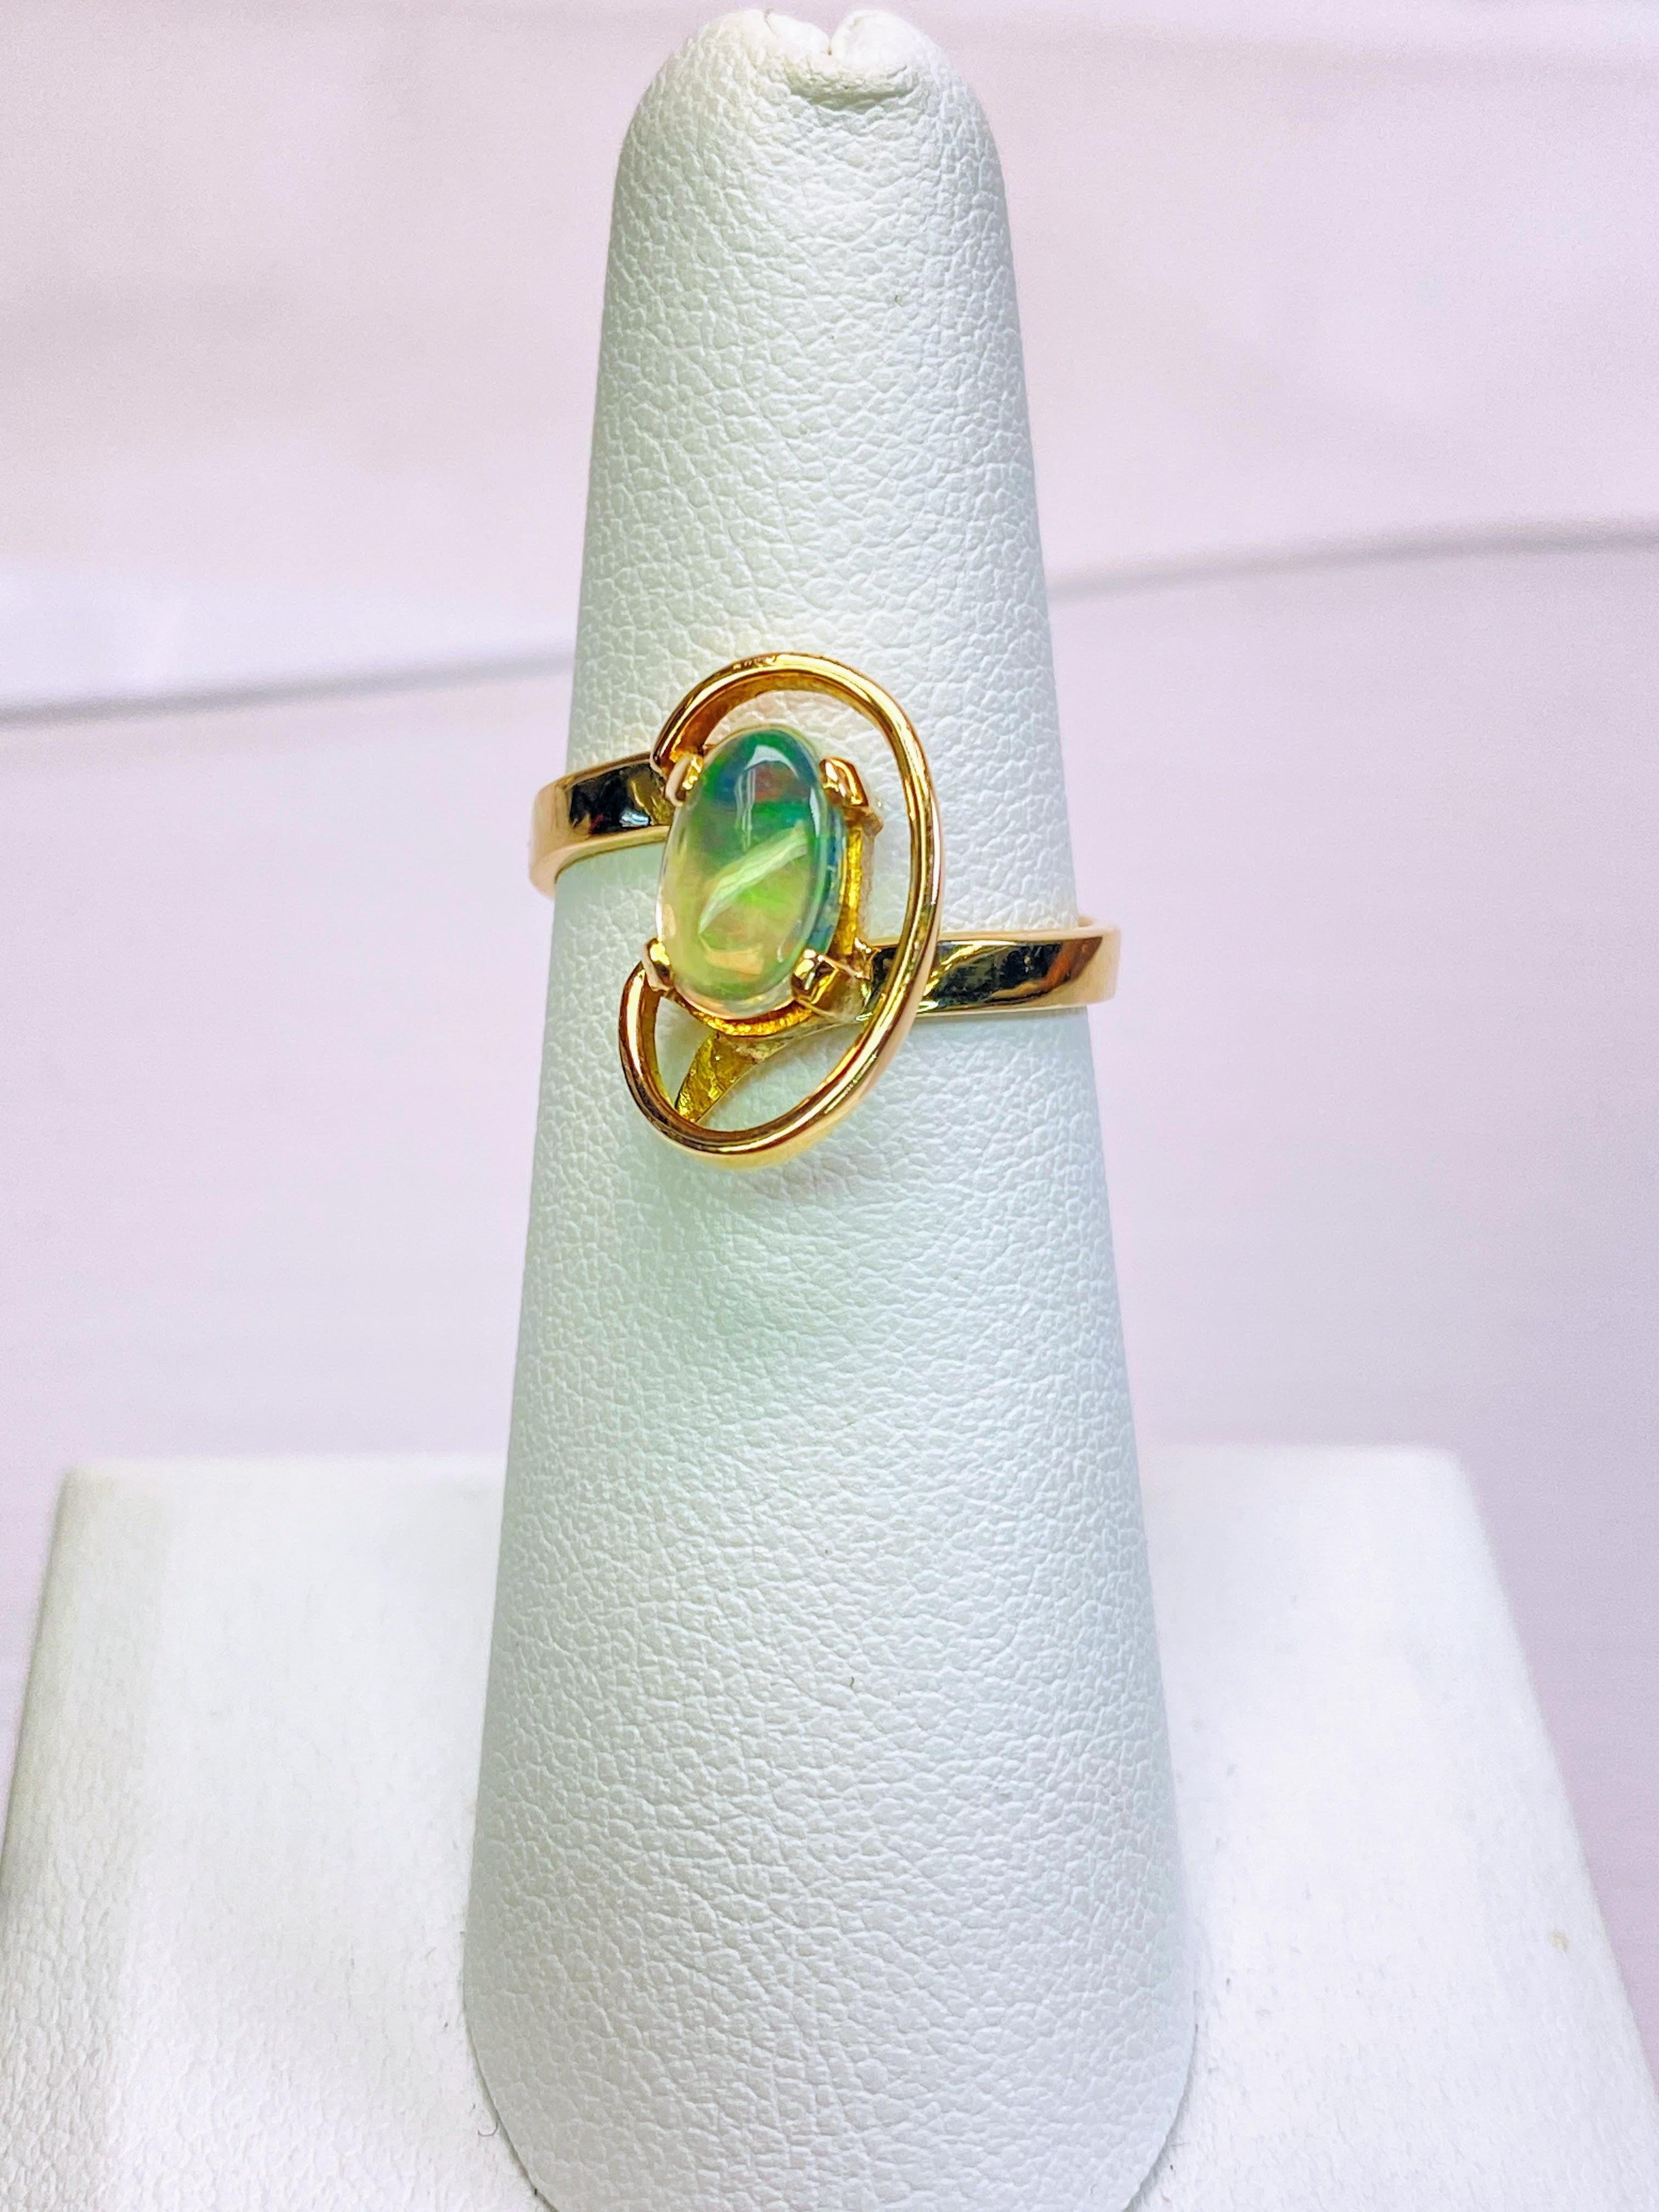 14K Yellow Solid Gold Estate Natural Fire Opal Cosmic Overlay Bypass Ring

This vintage ring exudes timeless charm with its solid 14K yellow gold construction and natural fire opal centerpiece. The cosmic overlay design adds a touch of celestial